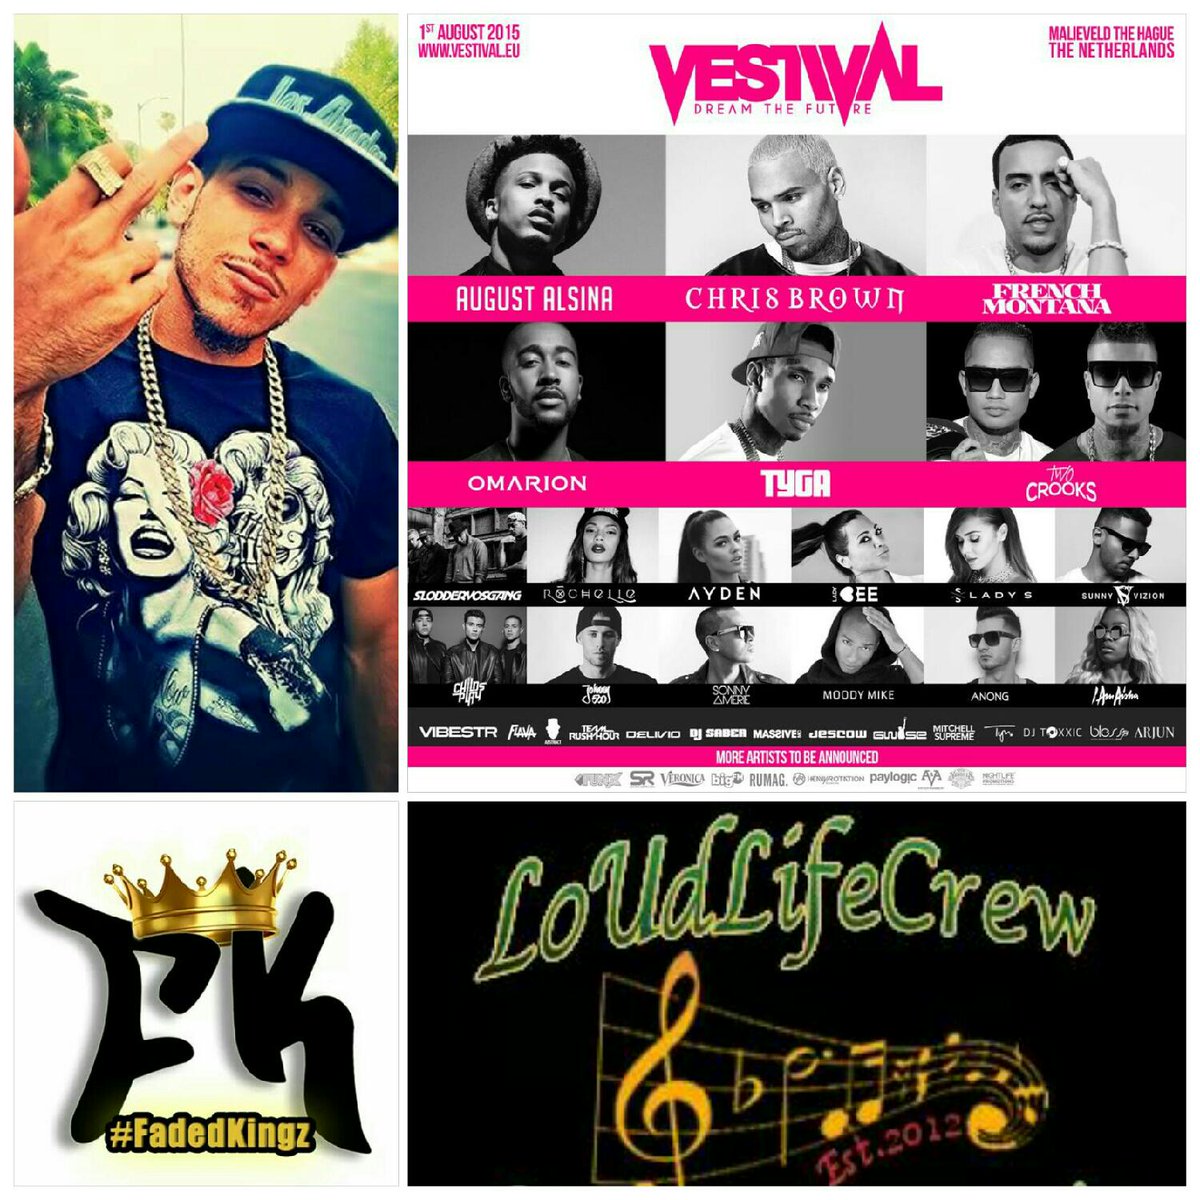 #Vestival Aug 1st with @chrisbrown @Tyga @AugustAlsina French and More!! #NextStopEurope #TheSwizZyEffect #LoUdLife